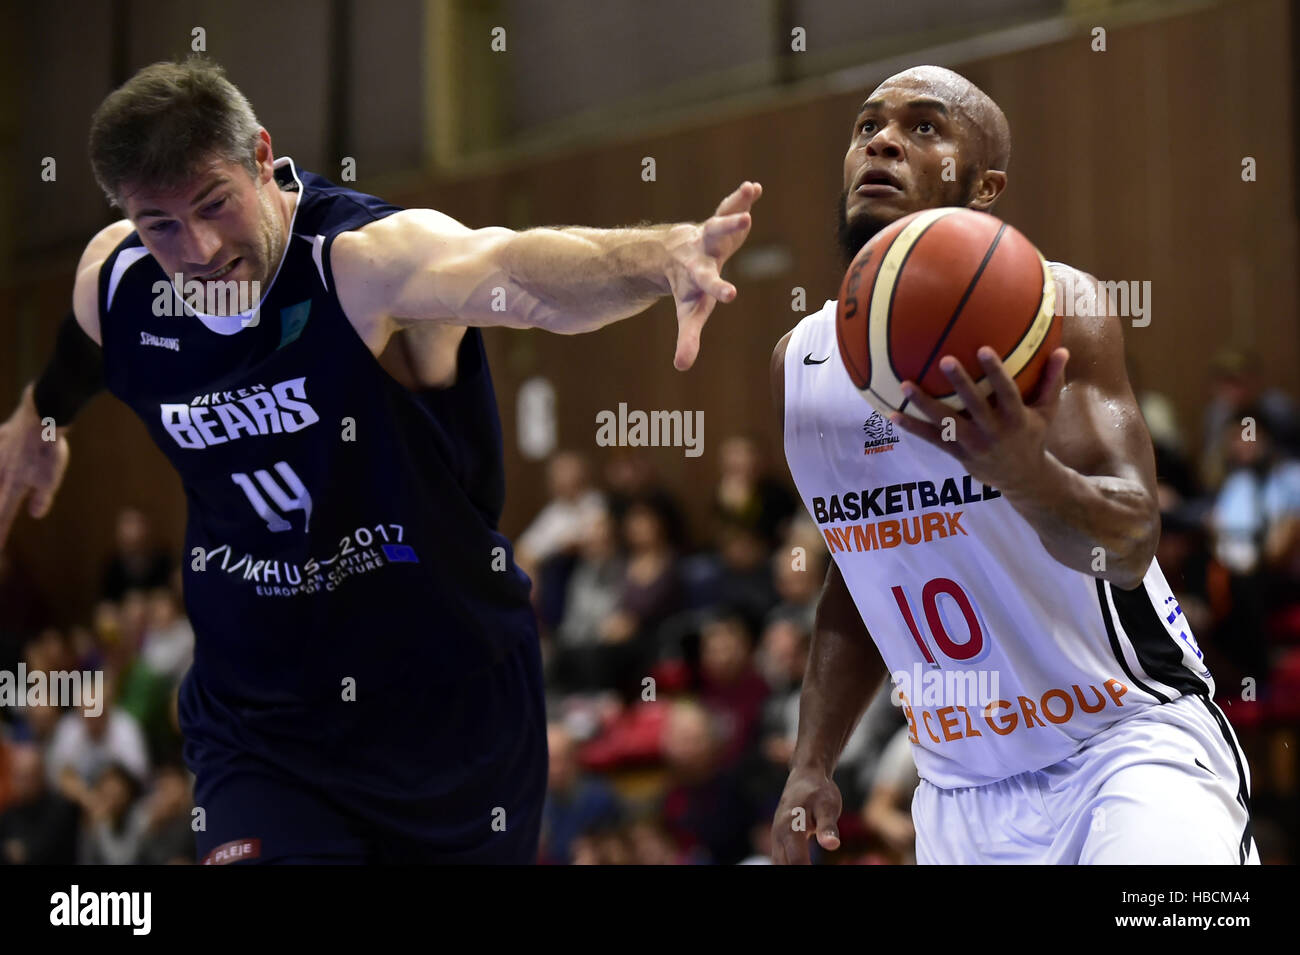 Nymburk, Czech Republic. 06th Dec, 2016. From left: Chris Christoffersen of Aarhus and Eugene Lawrence of Nymburk in action during the Men's Basketball Champions League group 8th round game: Nymburk vs Aarhus in Nymburk, Czech Republic, December 6, 2016. © Josef Vostarek/CTK Photo/Alamy Live News Stock Photo